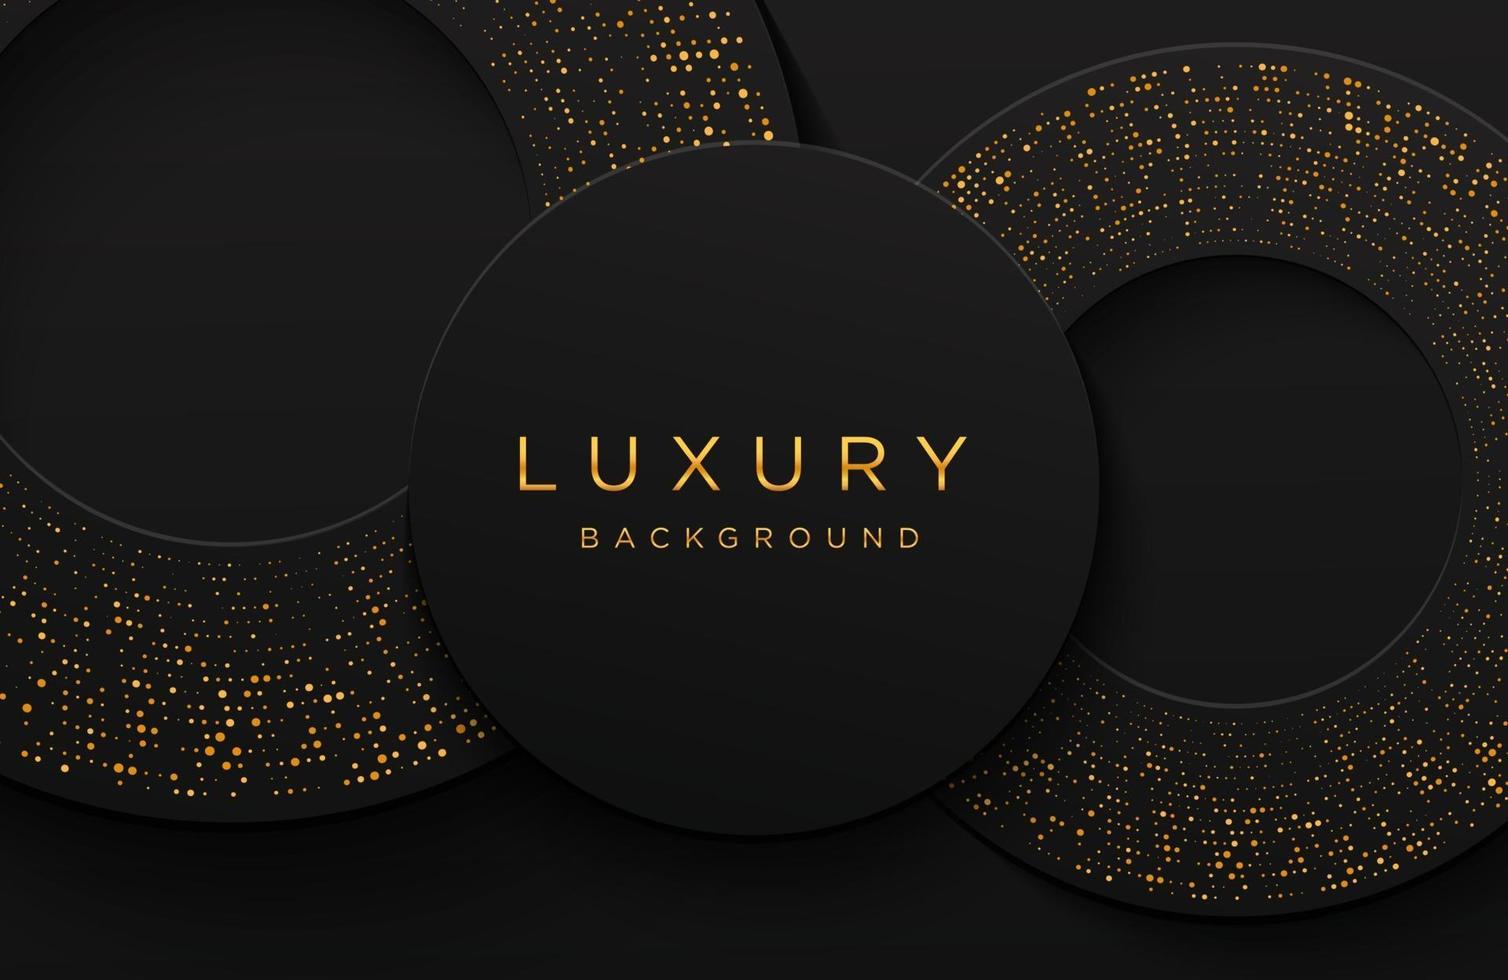 Luxury elegant 3d shape background with shimmering gold dotted pattern isolated on black. Abstract realistic papercut background. Elegant template vector